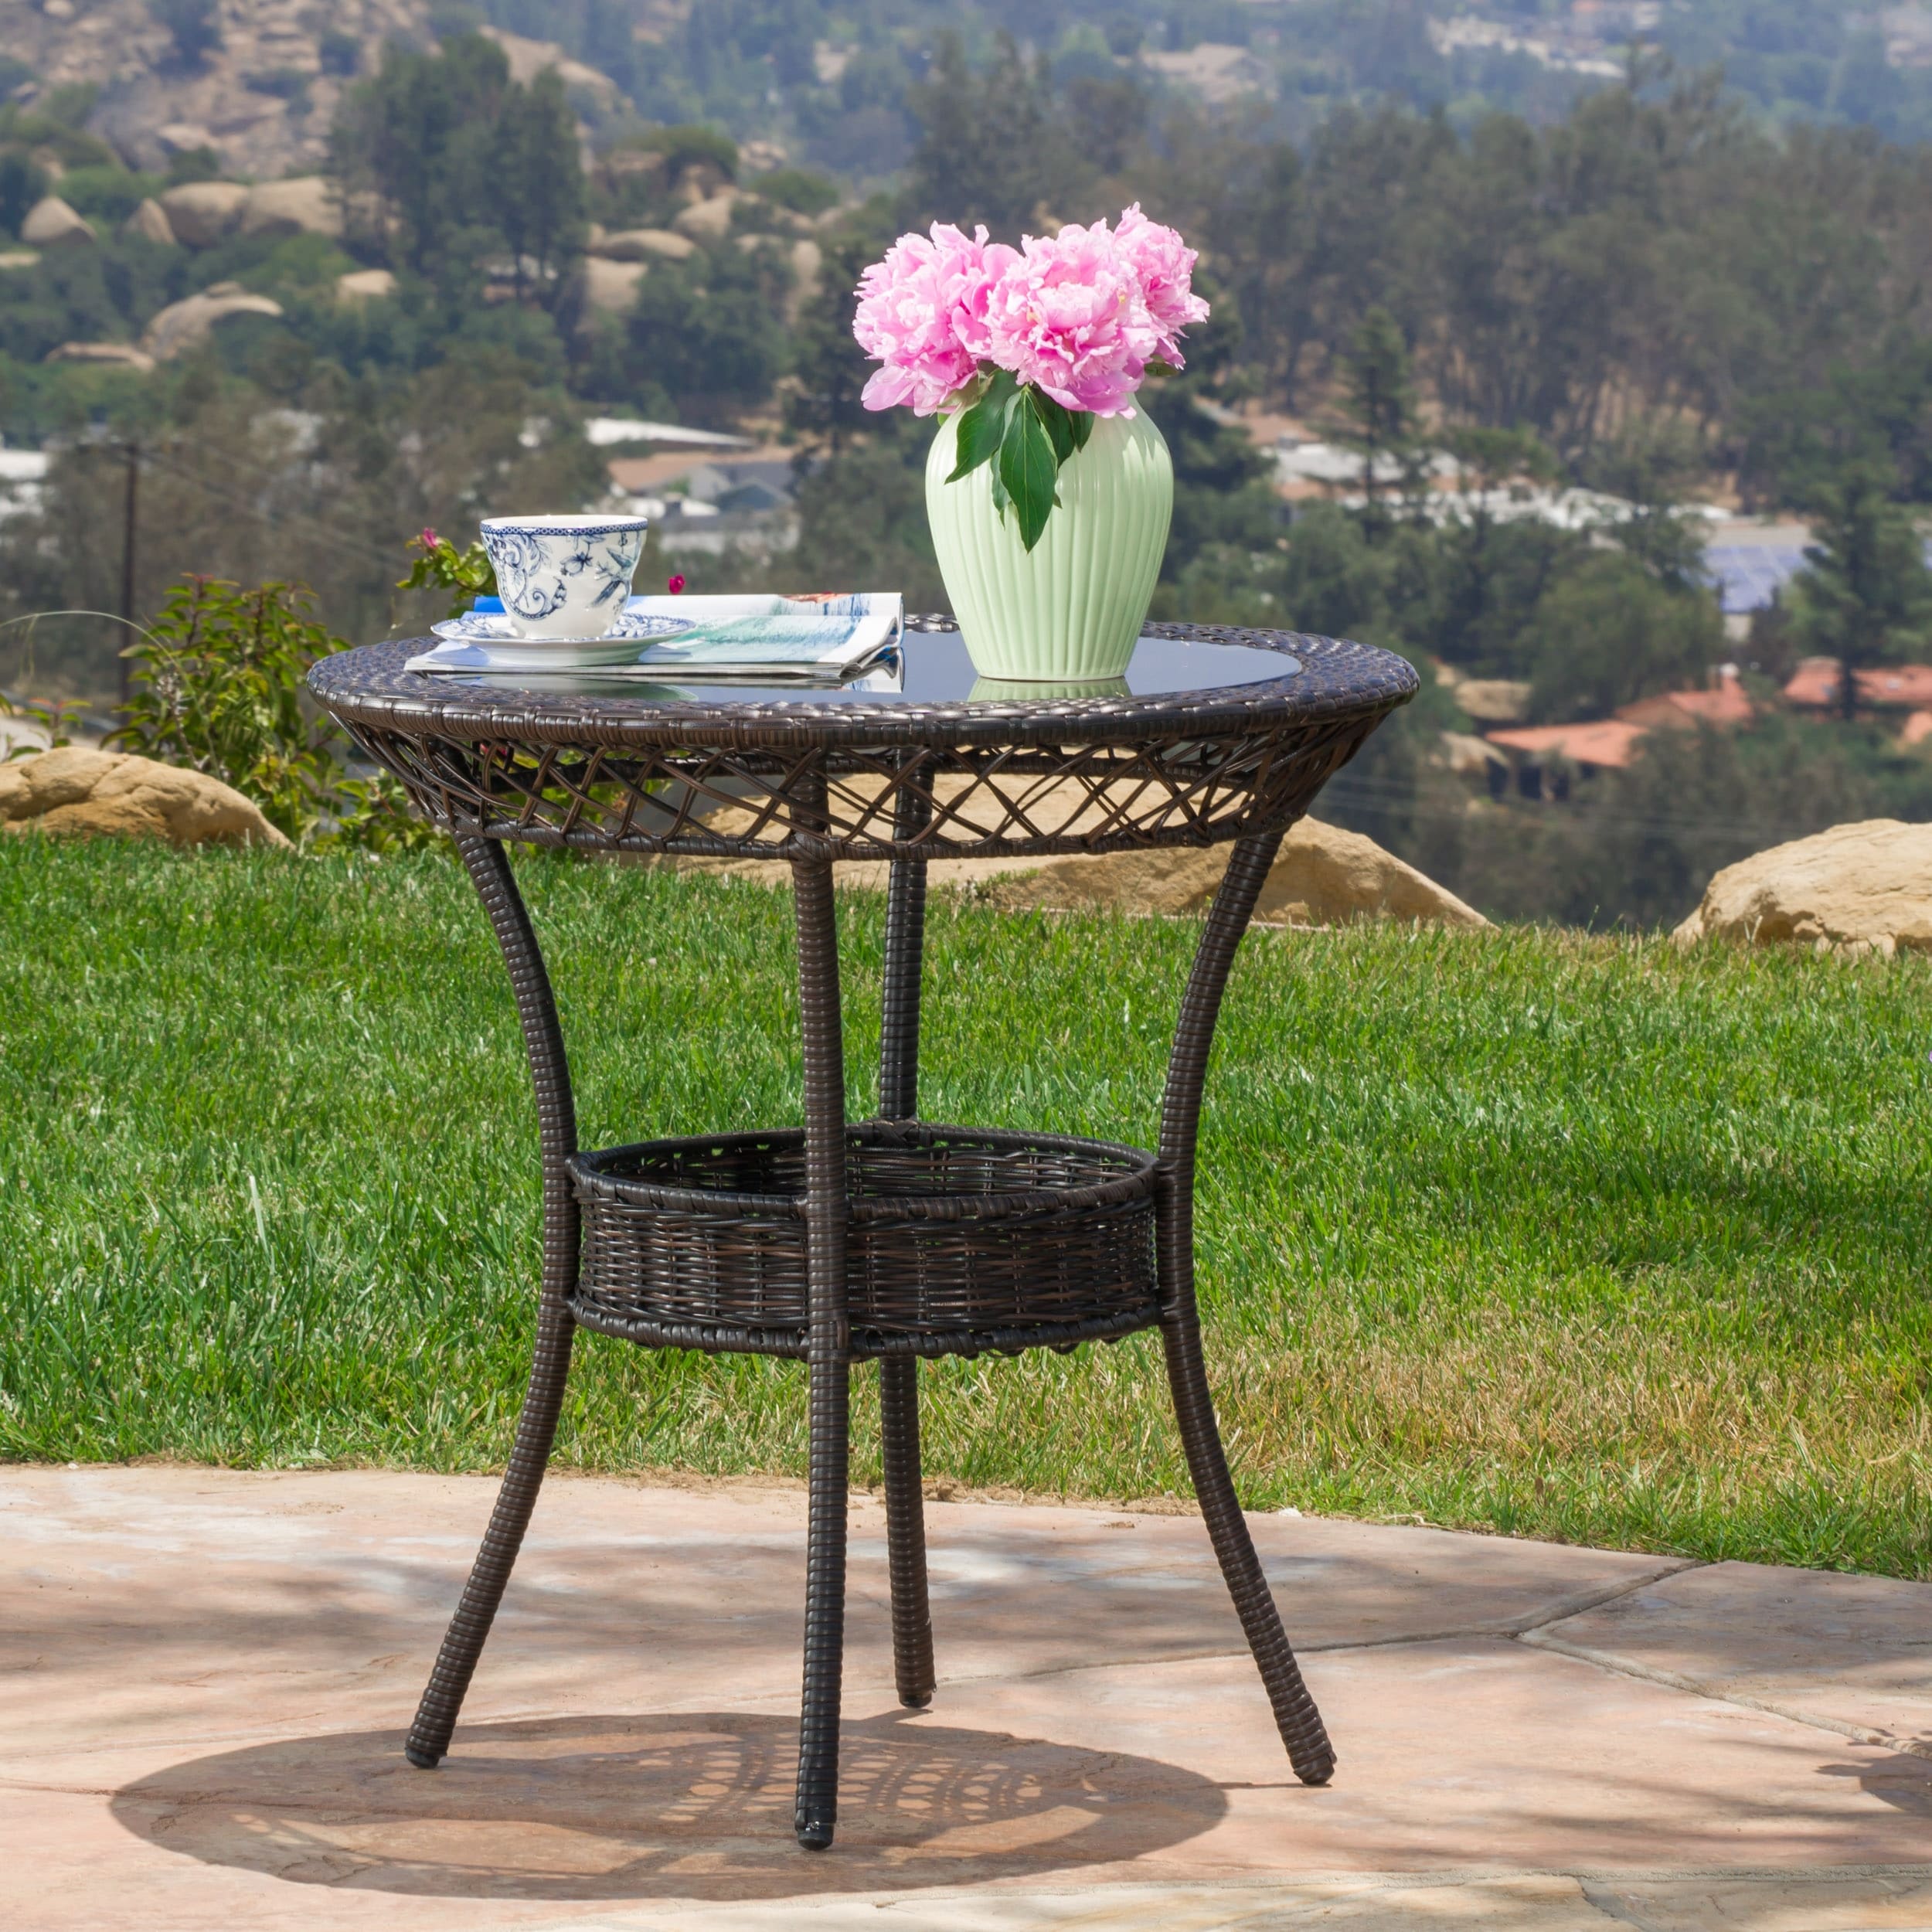 Christopher Knight Home Figi Outdoor Wicker Glass Table, Brown